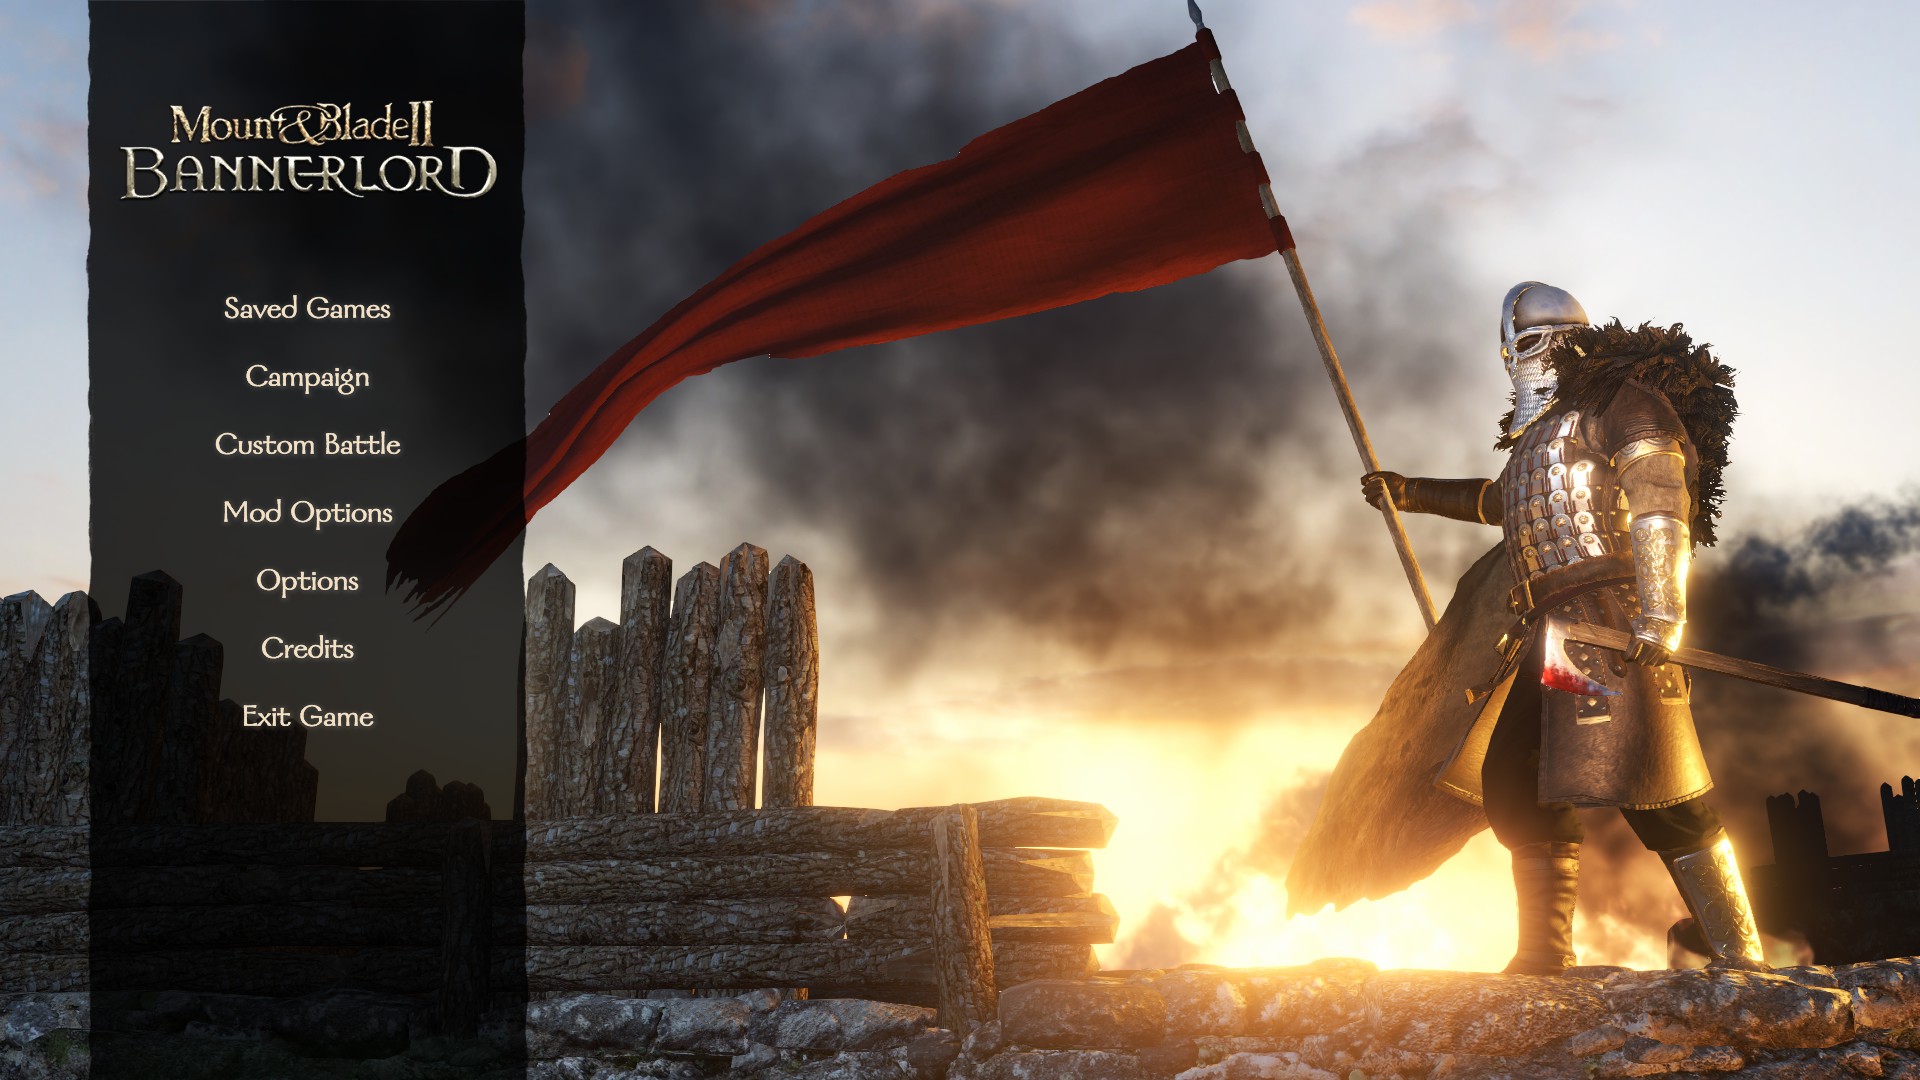 Title screen of the game Bannerlord, screenshot by Cody Clark